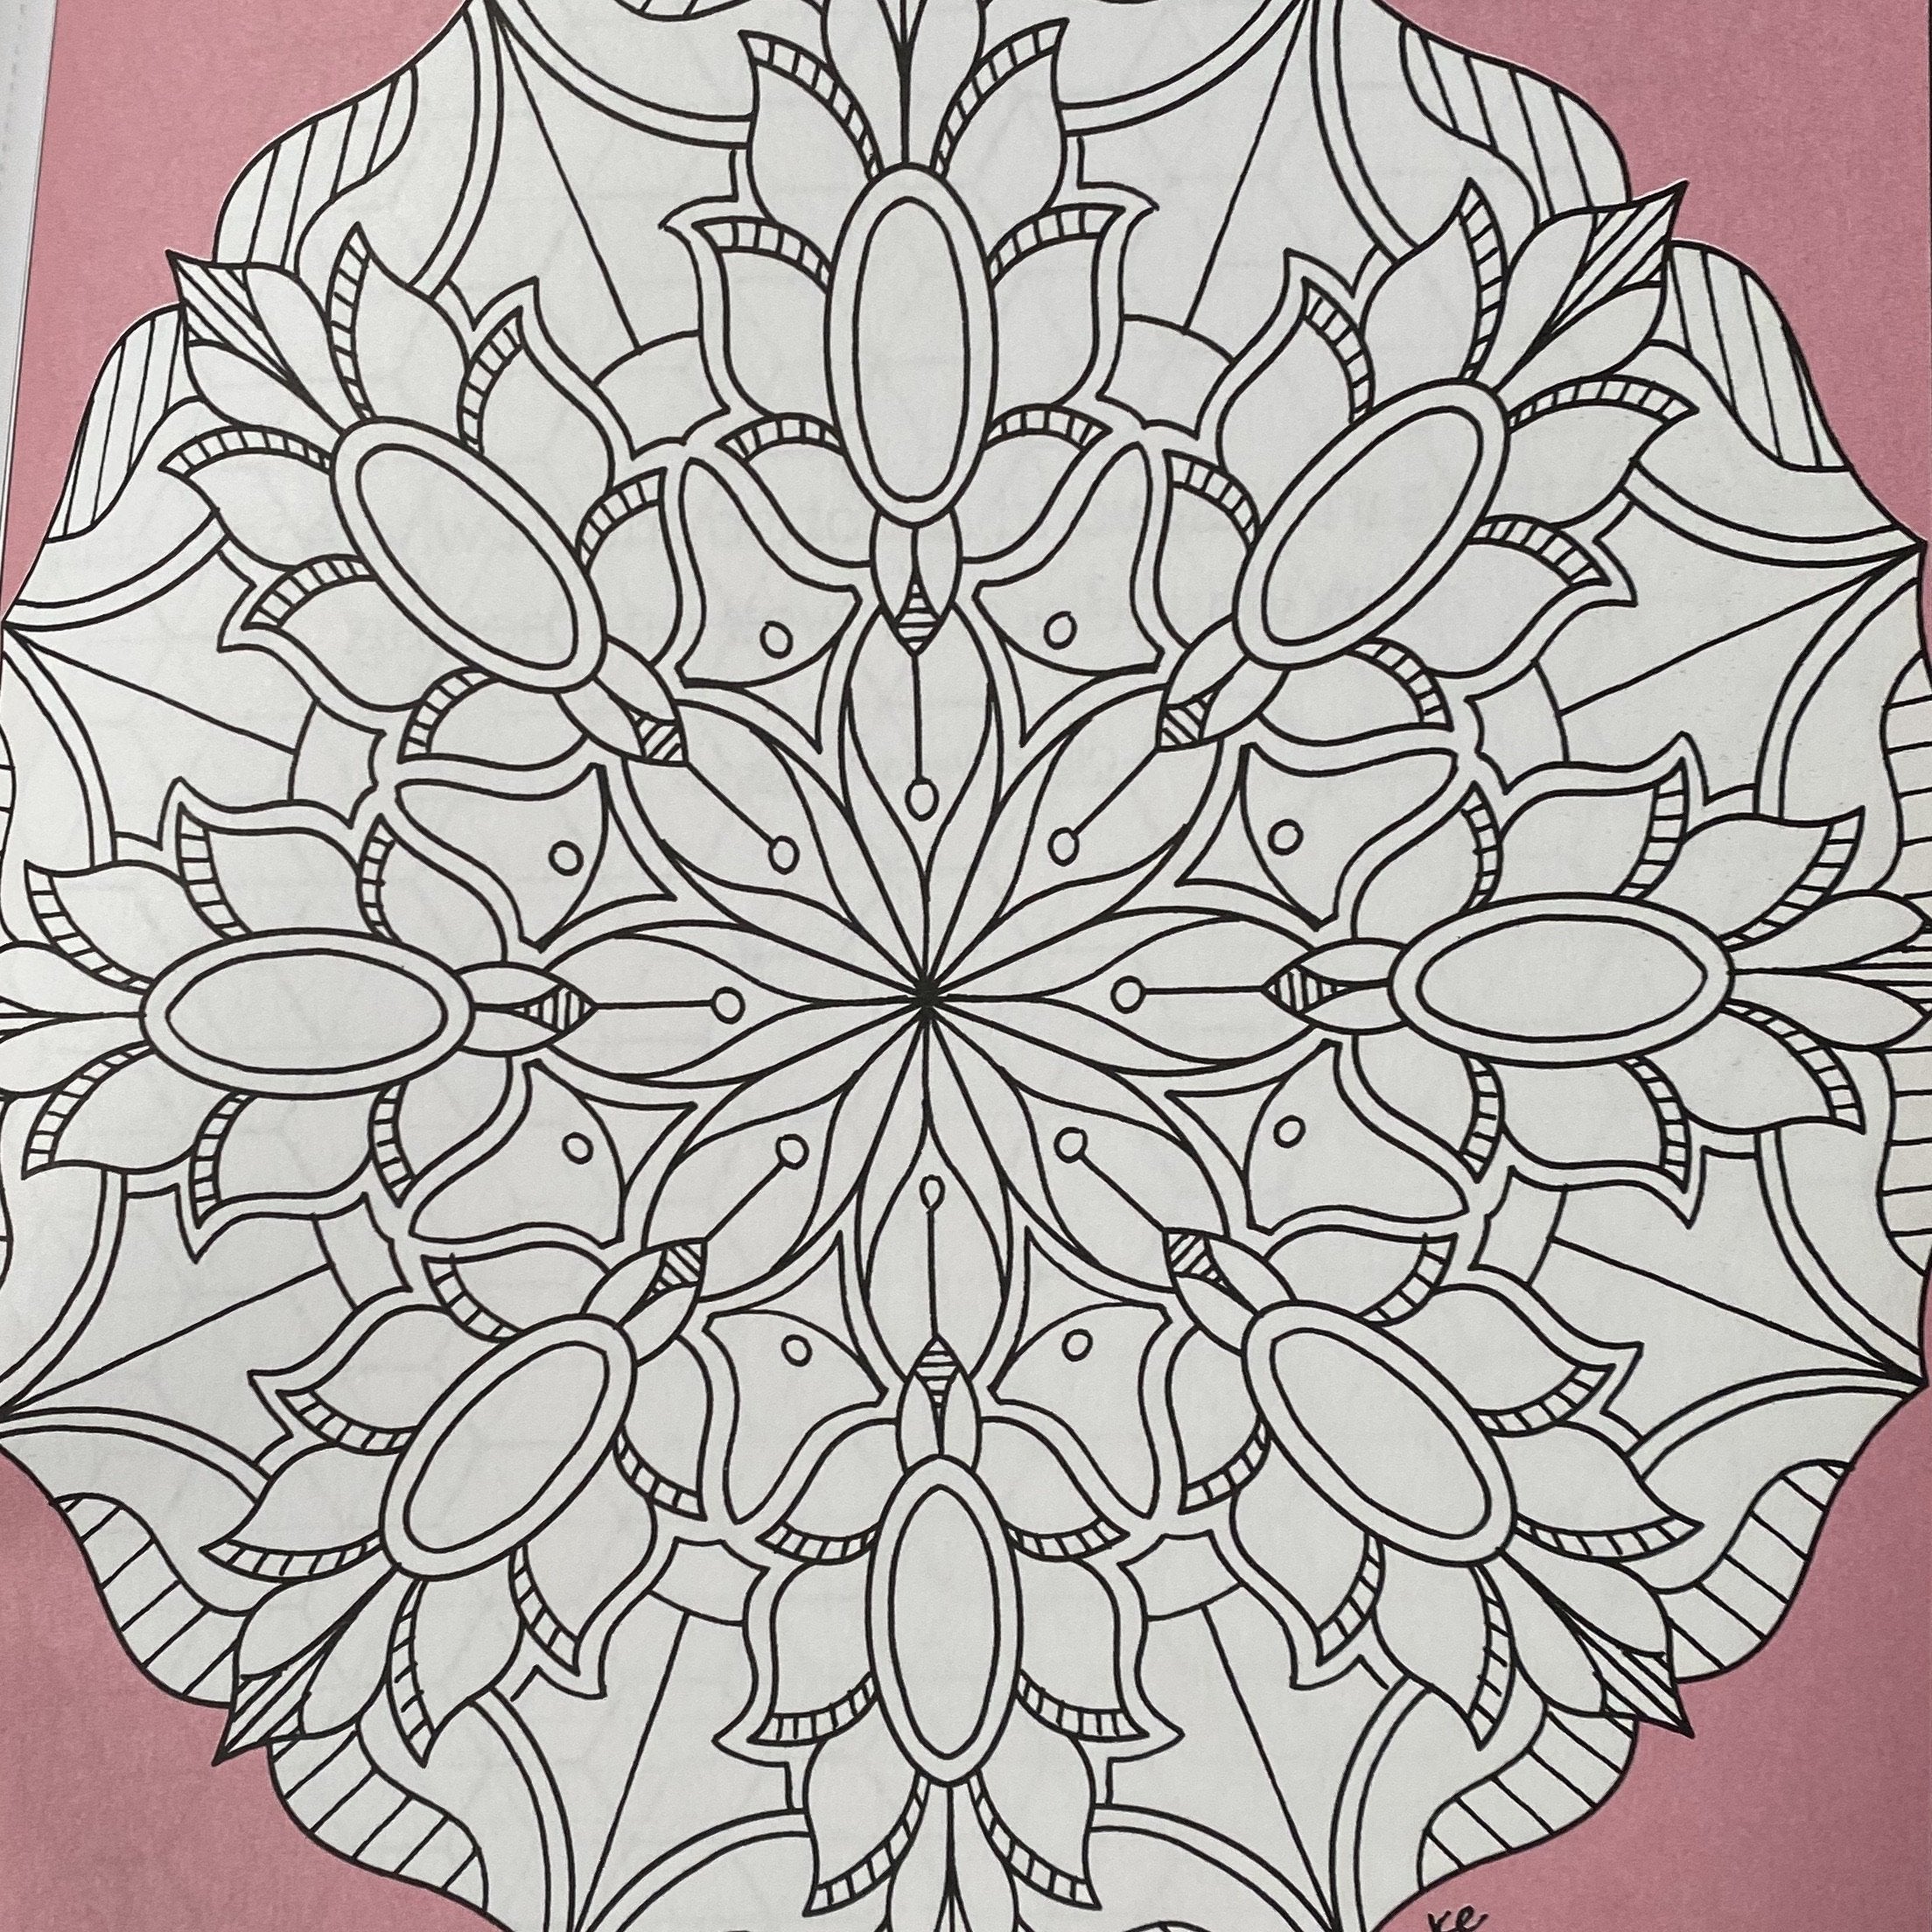 Bundle of 10 Relaxation Mandalas Coloring Book Pages